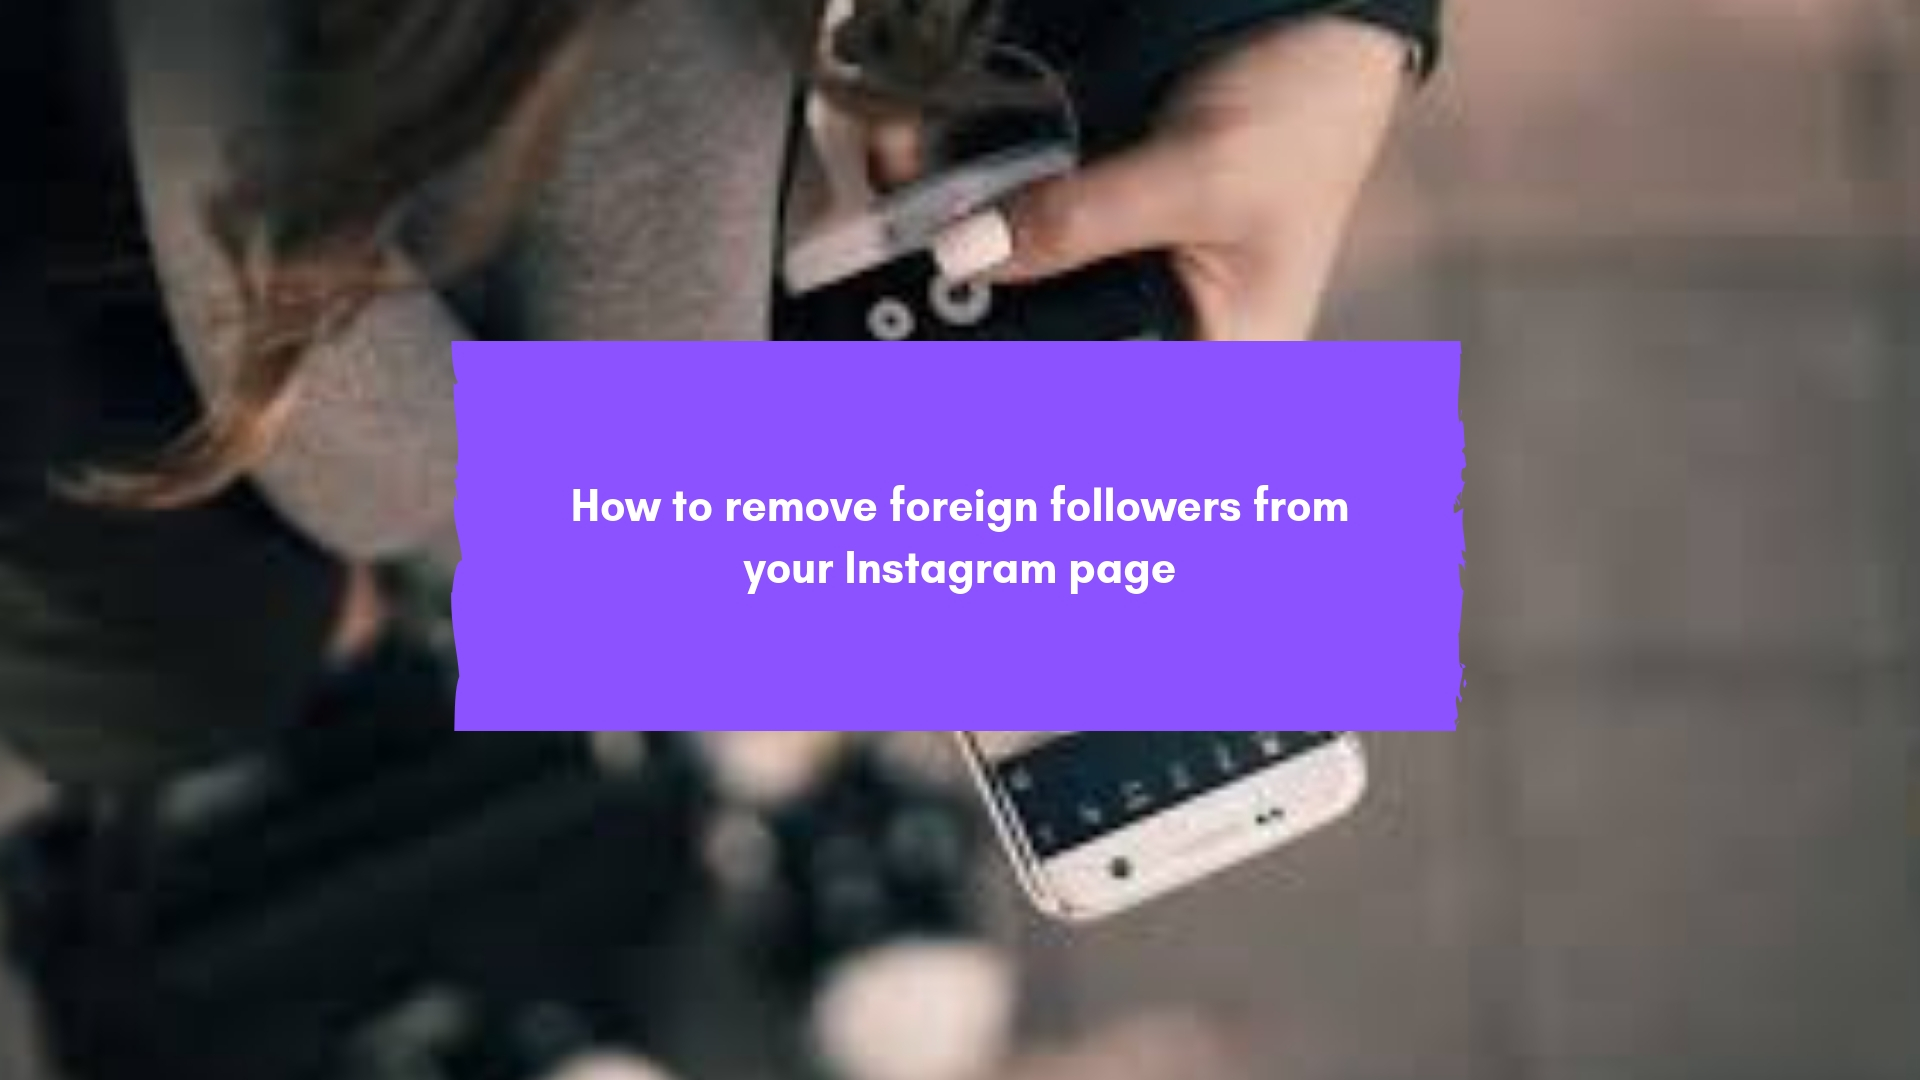 How to remove foreign followers from your Instagram page